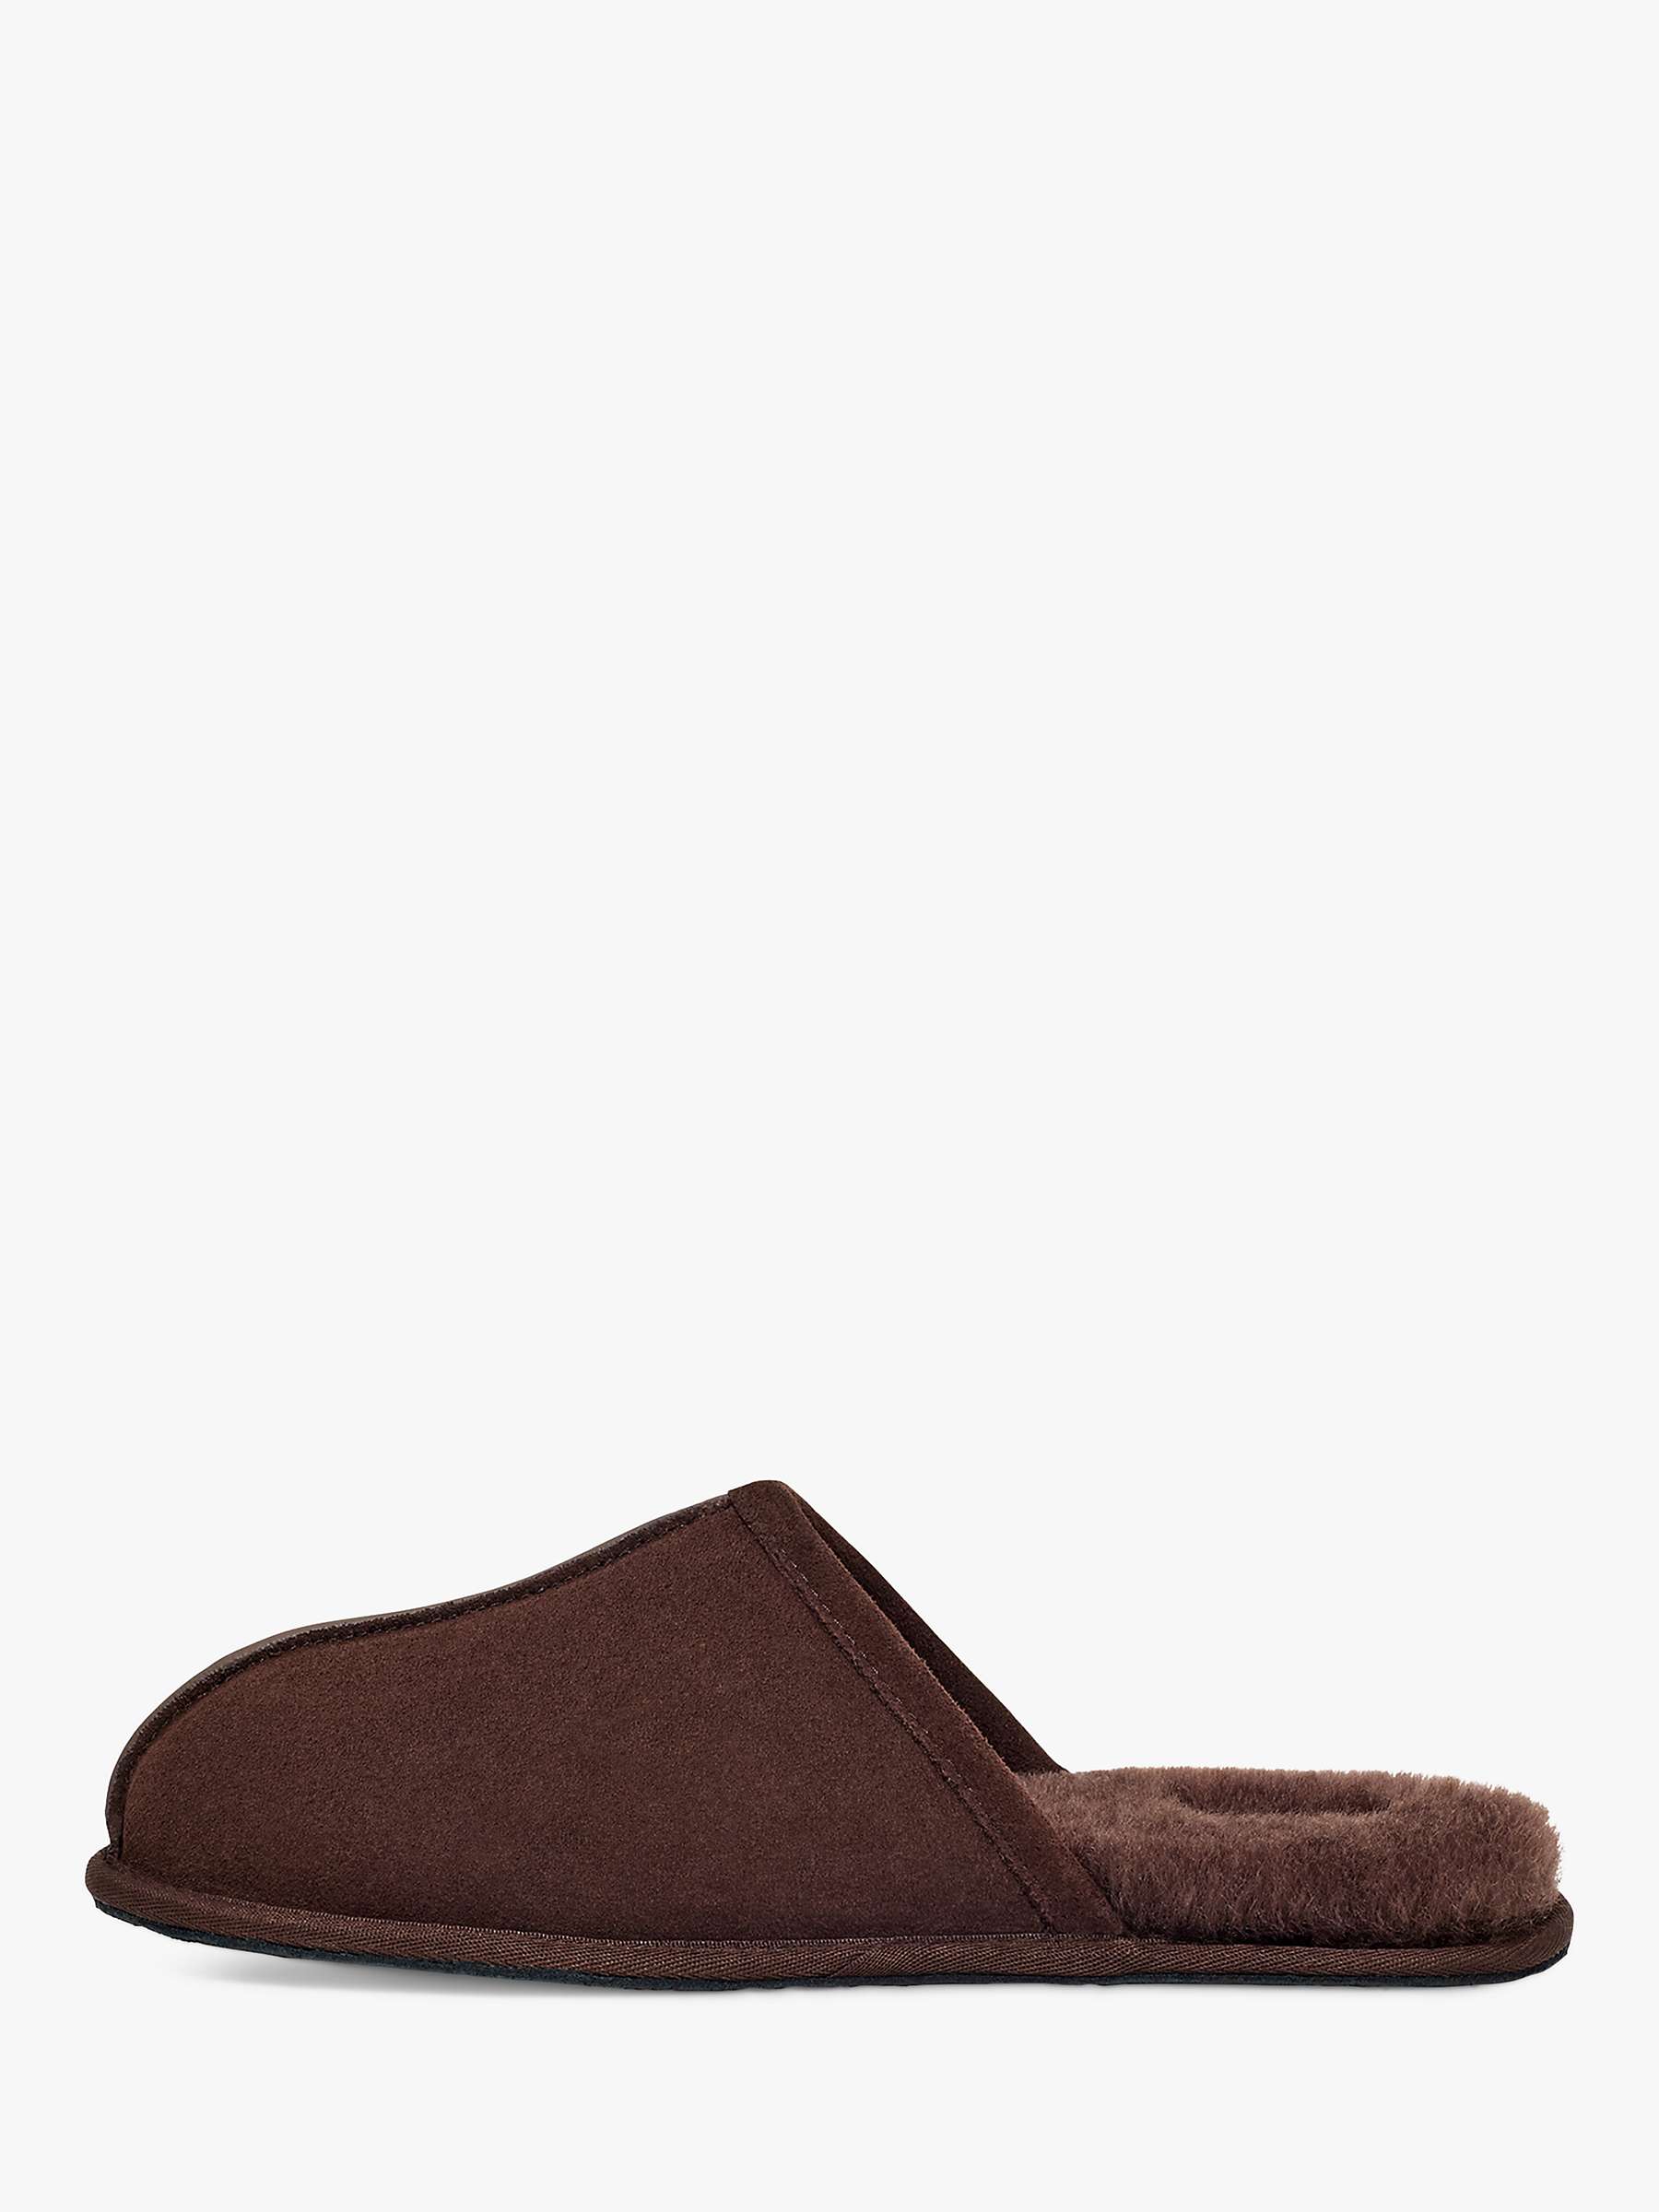 UGG Scuff Suede Slippers, Dusted Cocoa at John Lewis & Partners